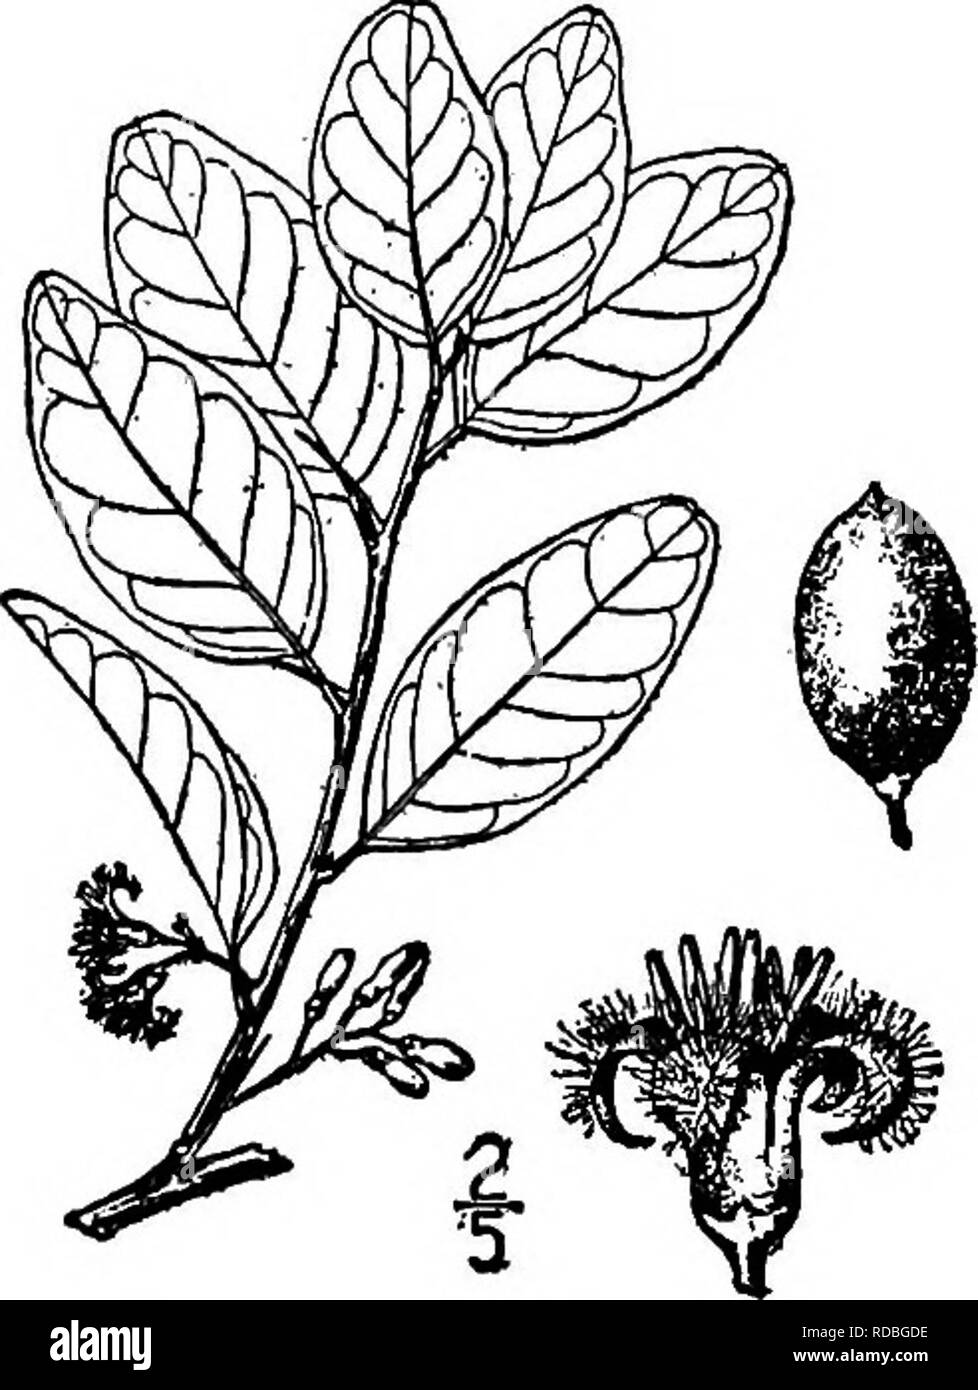 . North American trees : being descriptions and illustrations of the trees growing independently of cultivation in North America, north of Mexico and the West Indies . Trees. Tallowwood 377 vm^ II. TALLOWWOOD GENUS XIMENIA [PLUMIER] LINNAEUS Species Ximenia americana Linnaeus THORNY small tree or shrub, which encircles the globe in the tropics, entering our area in peninsular Florida and the Keys, where it attains a maximum height of 6 meters. It is the type species of the genus. It is also called Seaside plum, Hog plum, Moimtain plum. False sandalwood, and Wild olive. The branches are thorny  Stock Photo